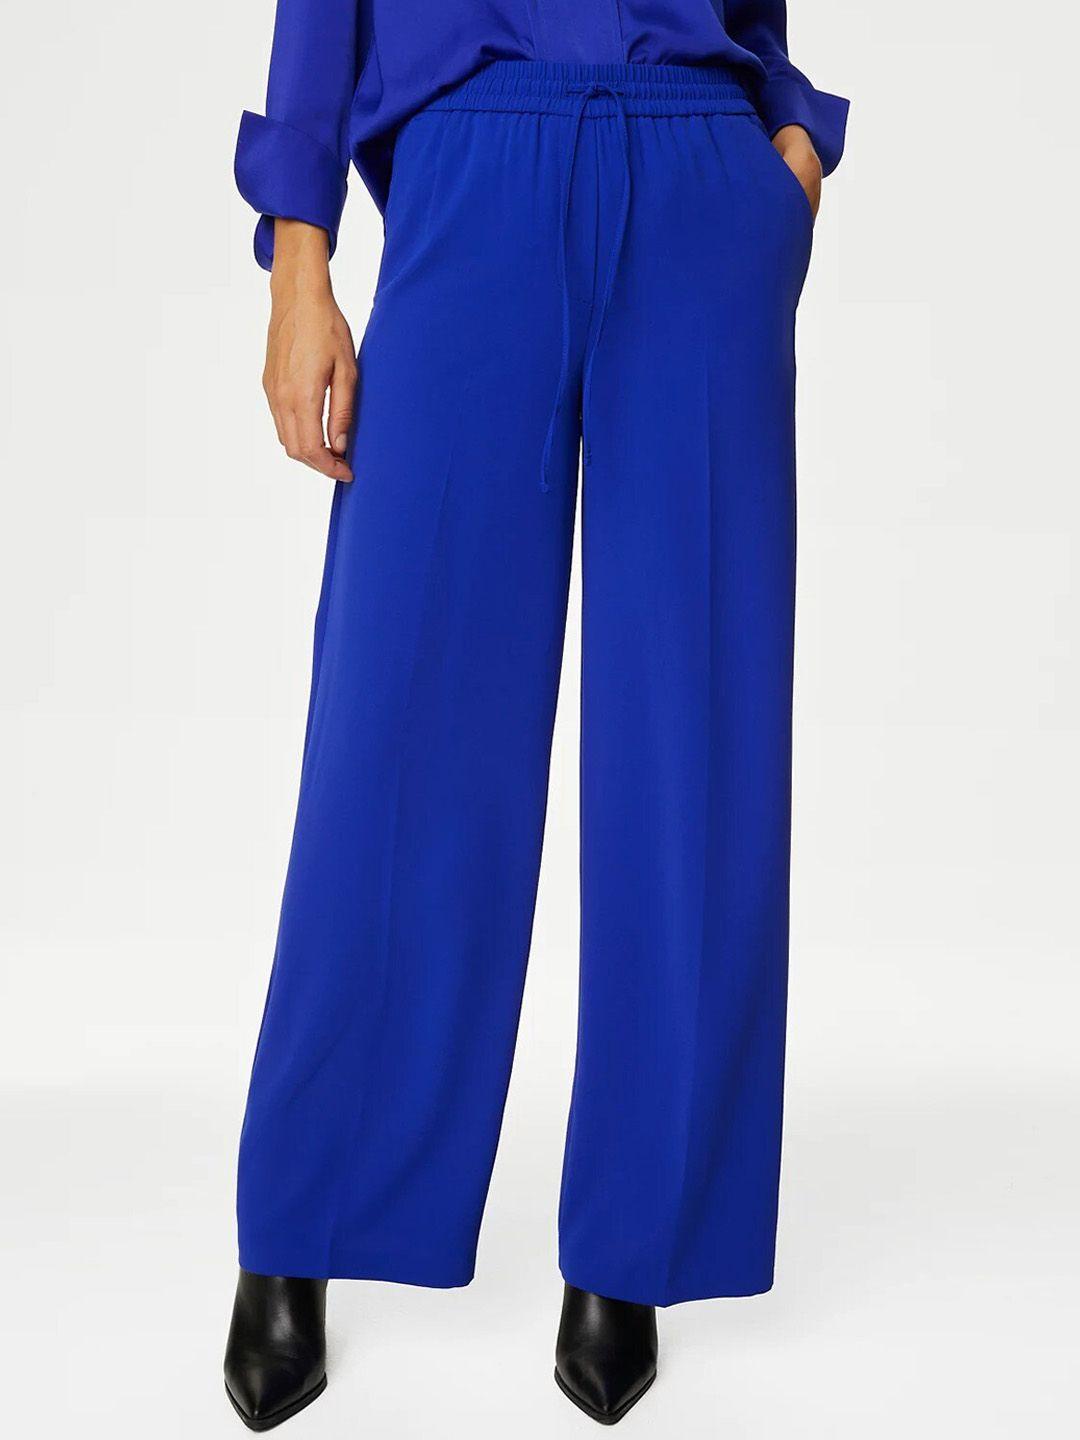 marks-&-spencer-women-flared-high-rise-parallel-trousers